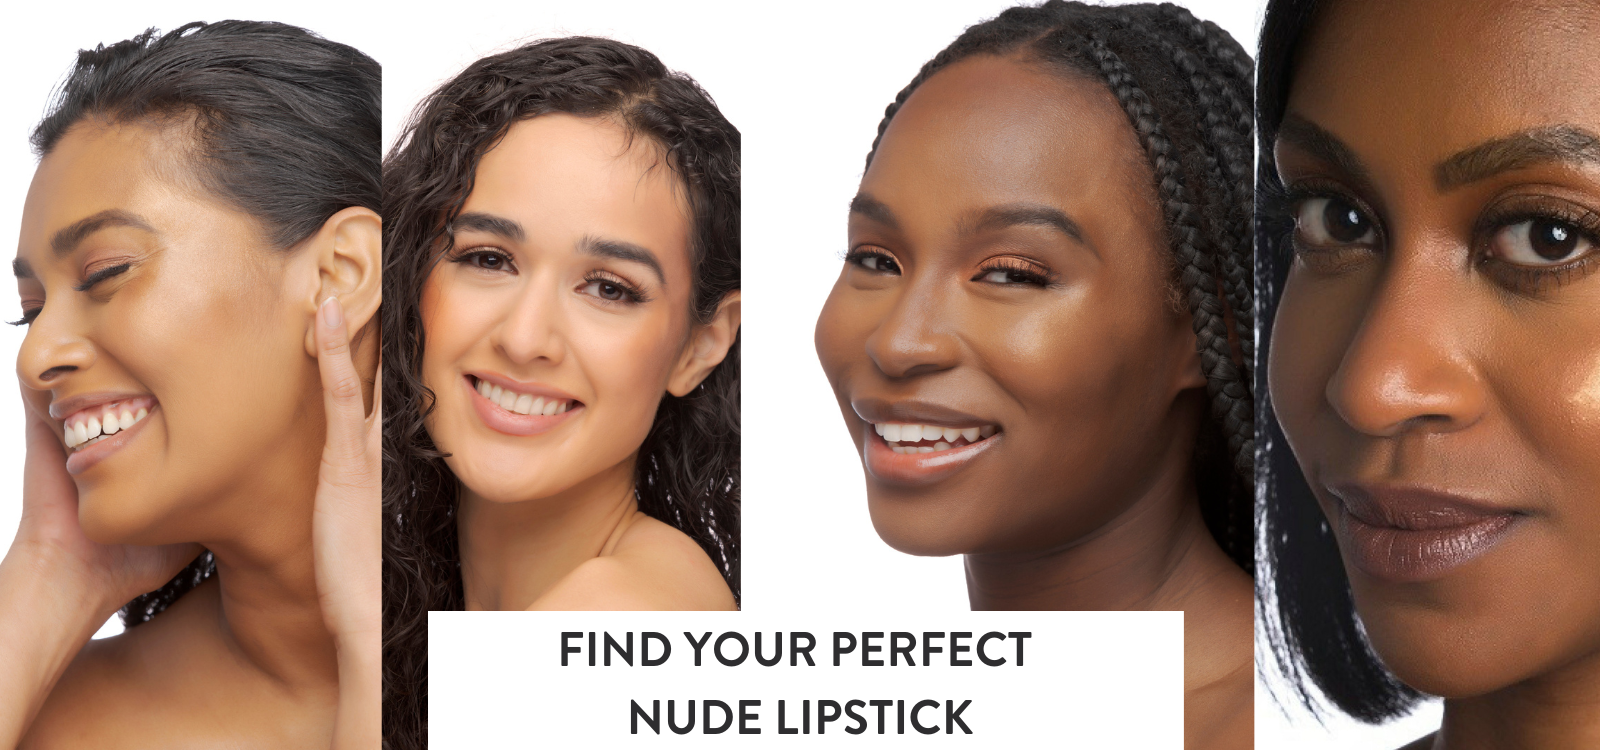 Find Your Perfect Nude Lipstick